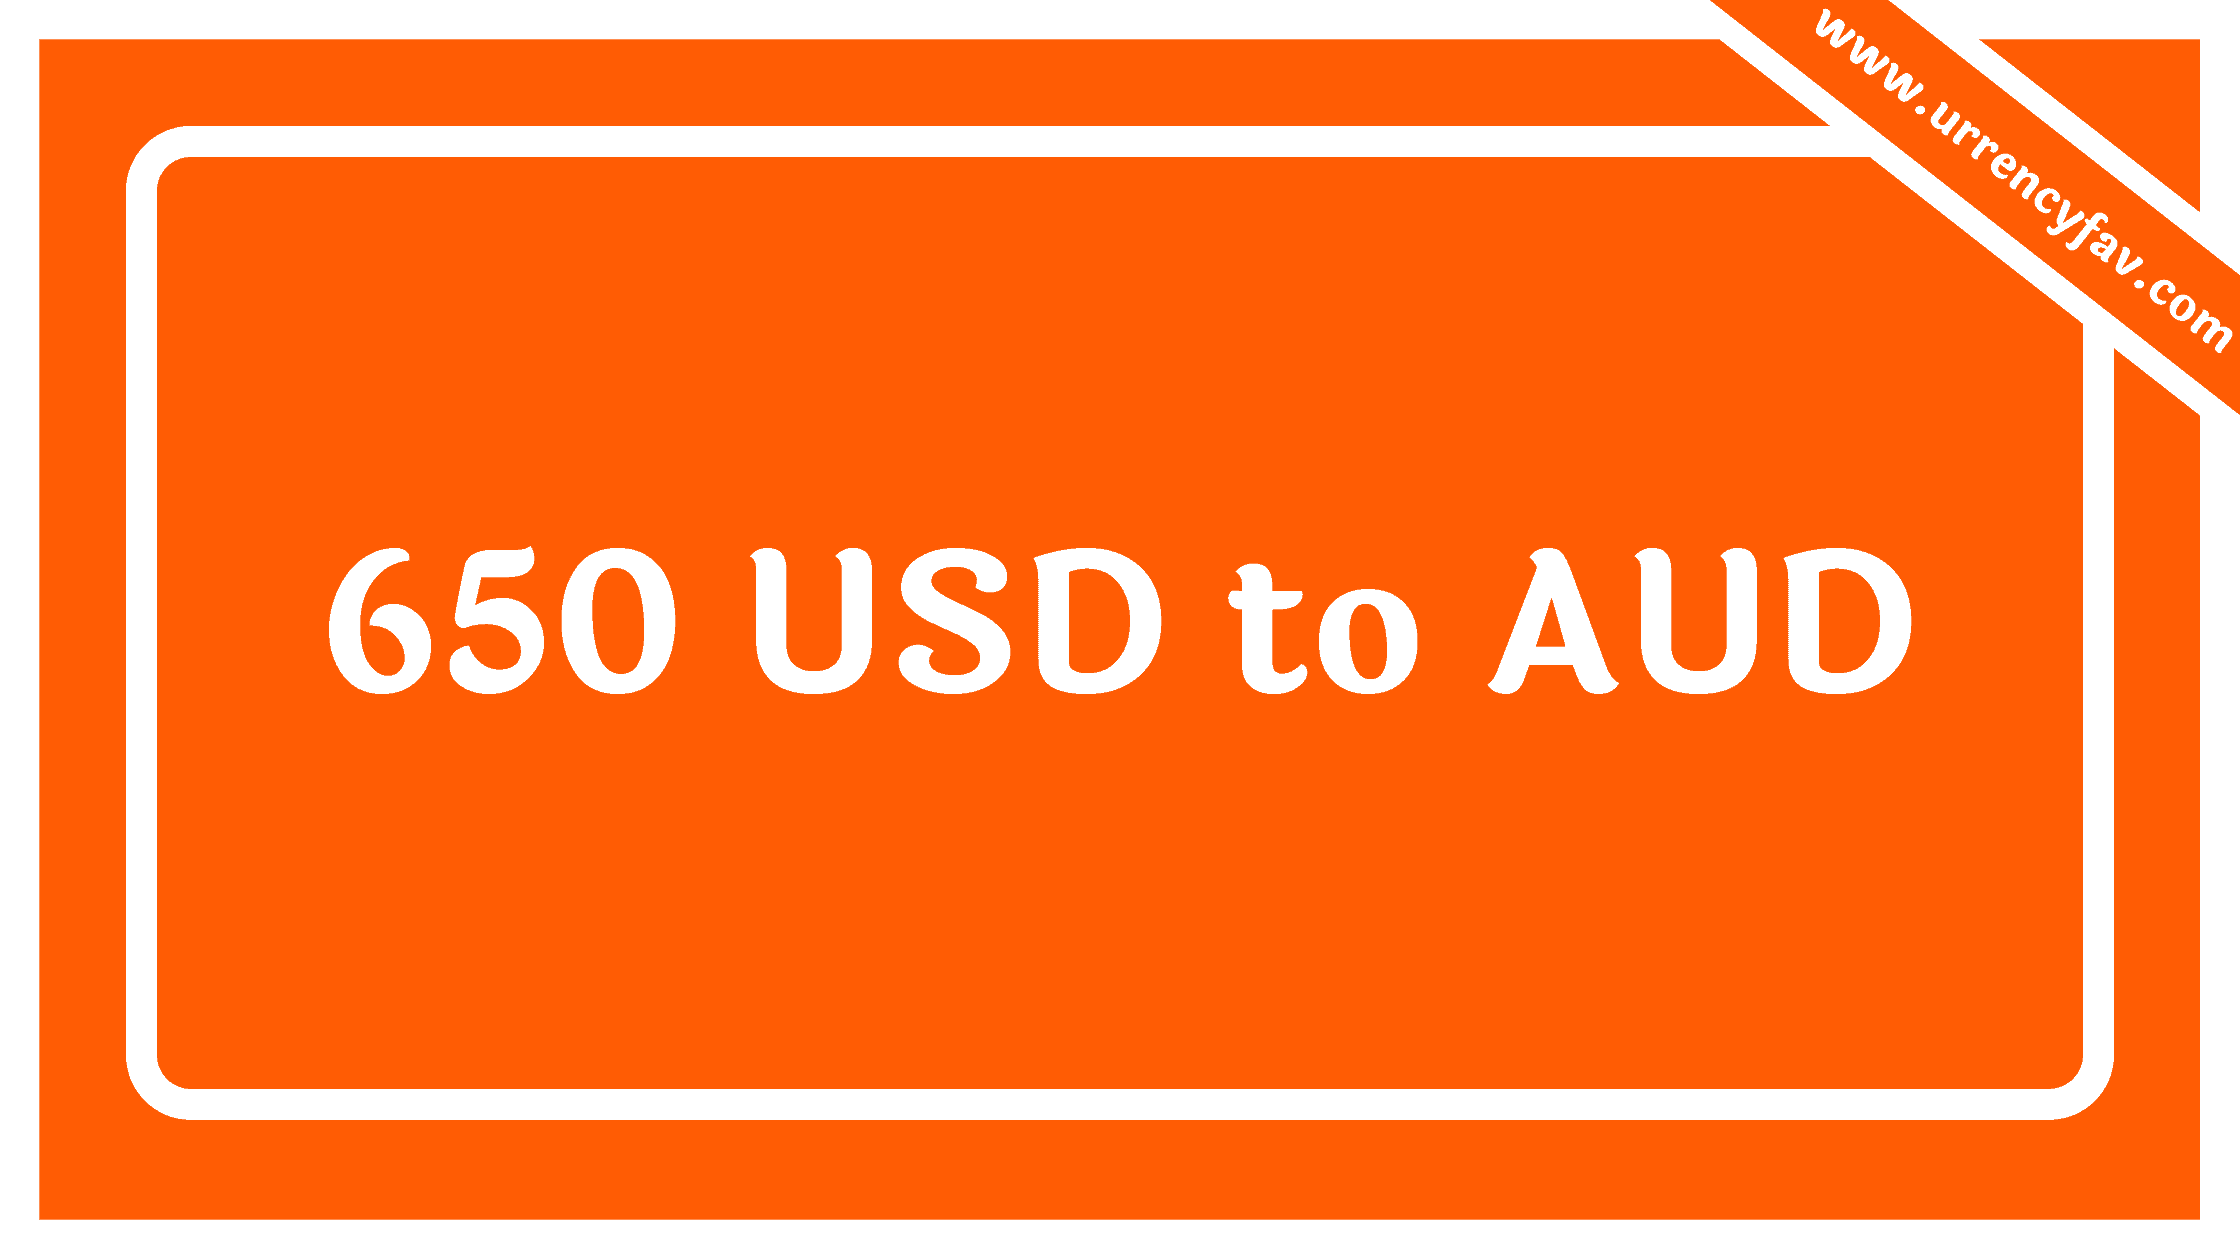 650 USD to AUD